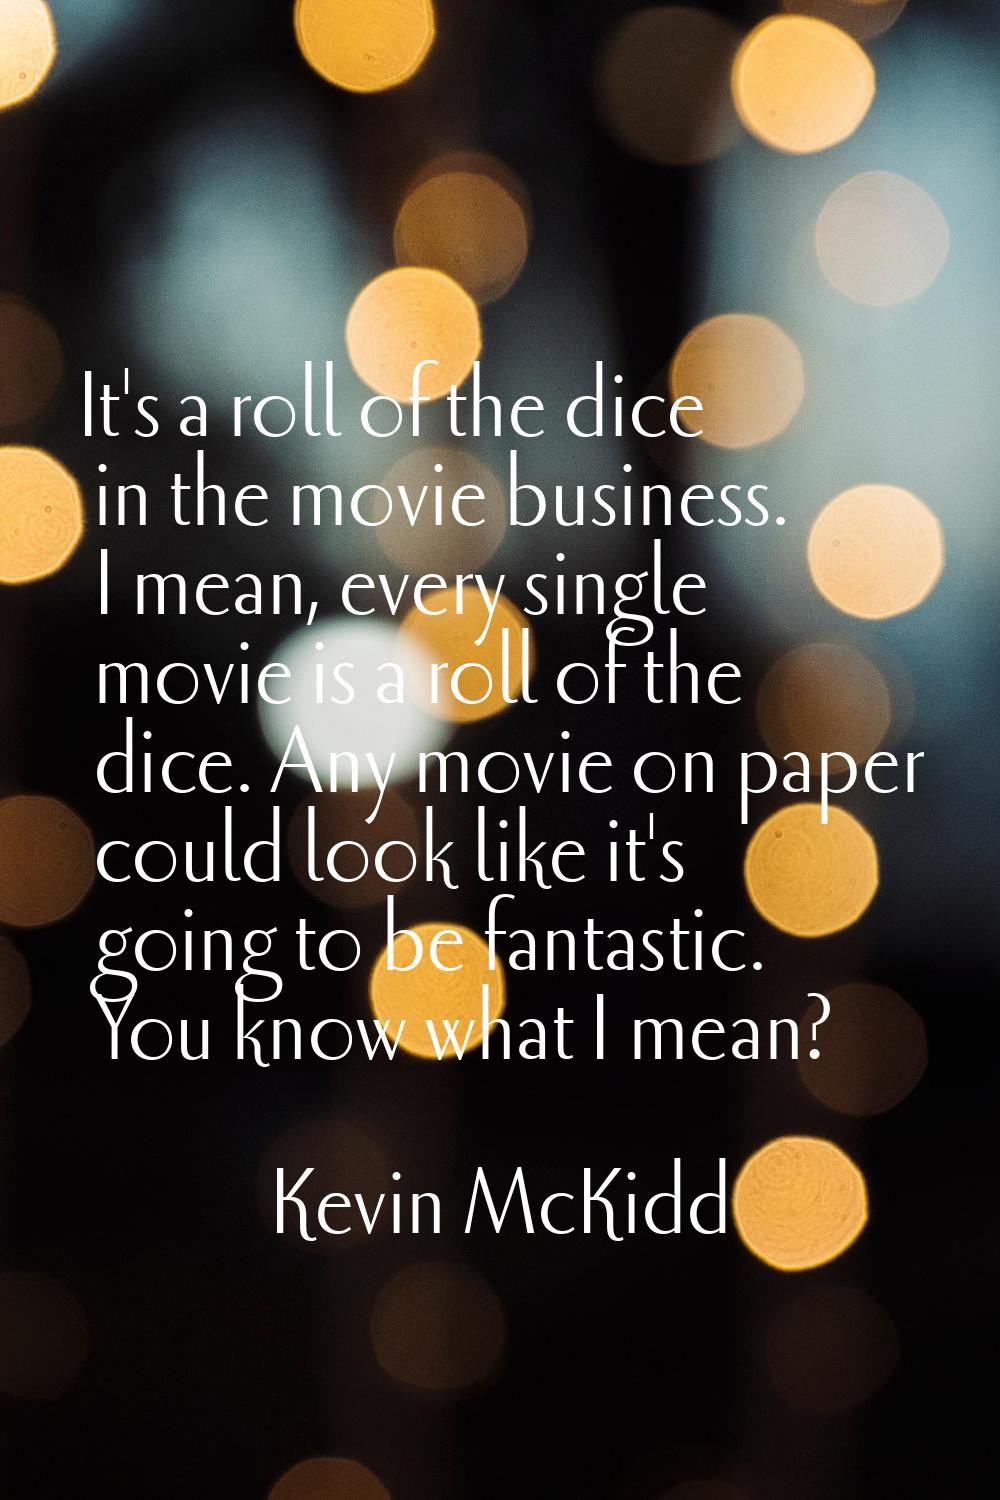 It's a roll of the dice in the movie business. I mean, every single movie is a roll of the dice. An